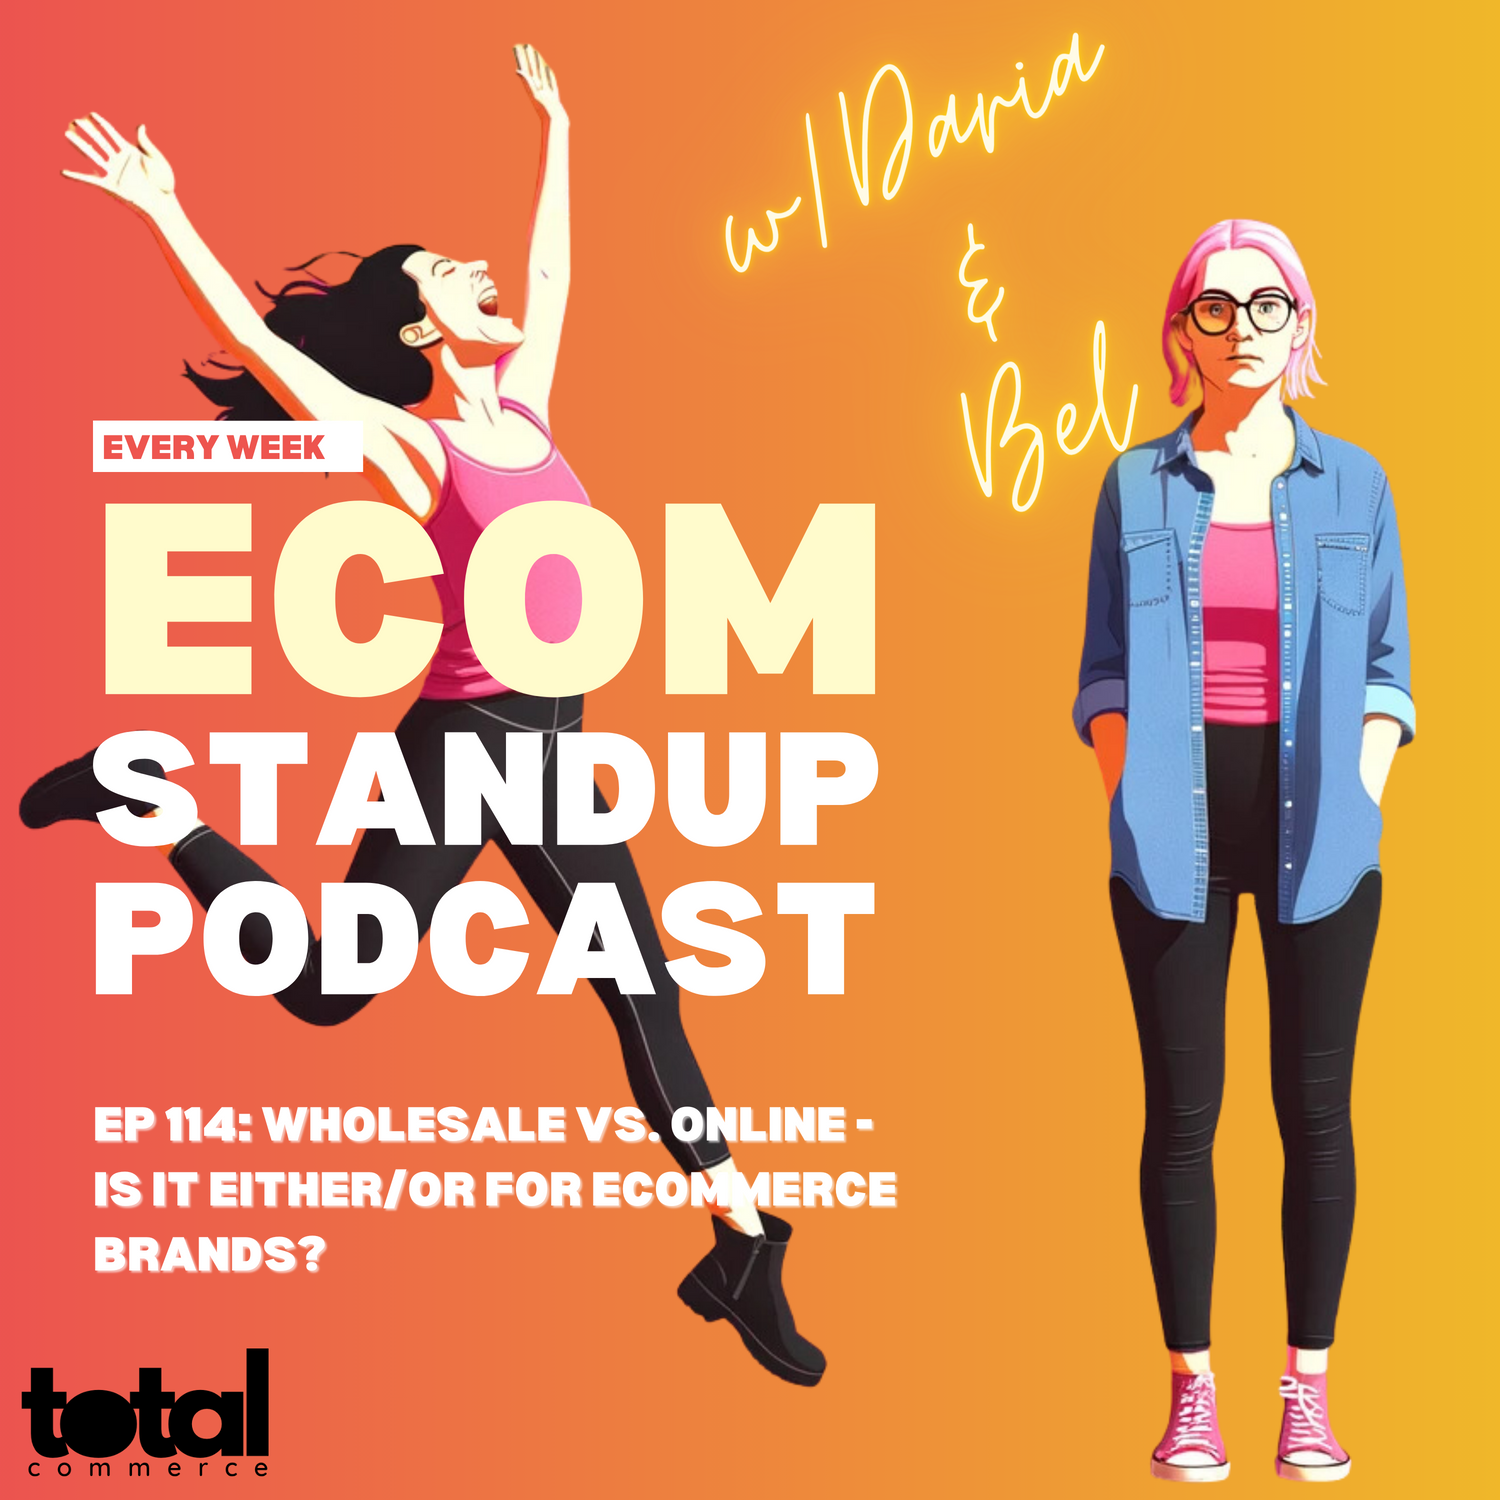 EP 114: Wholesale vs. Online - Is It Either/Or For eCommerce Brands?